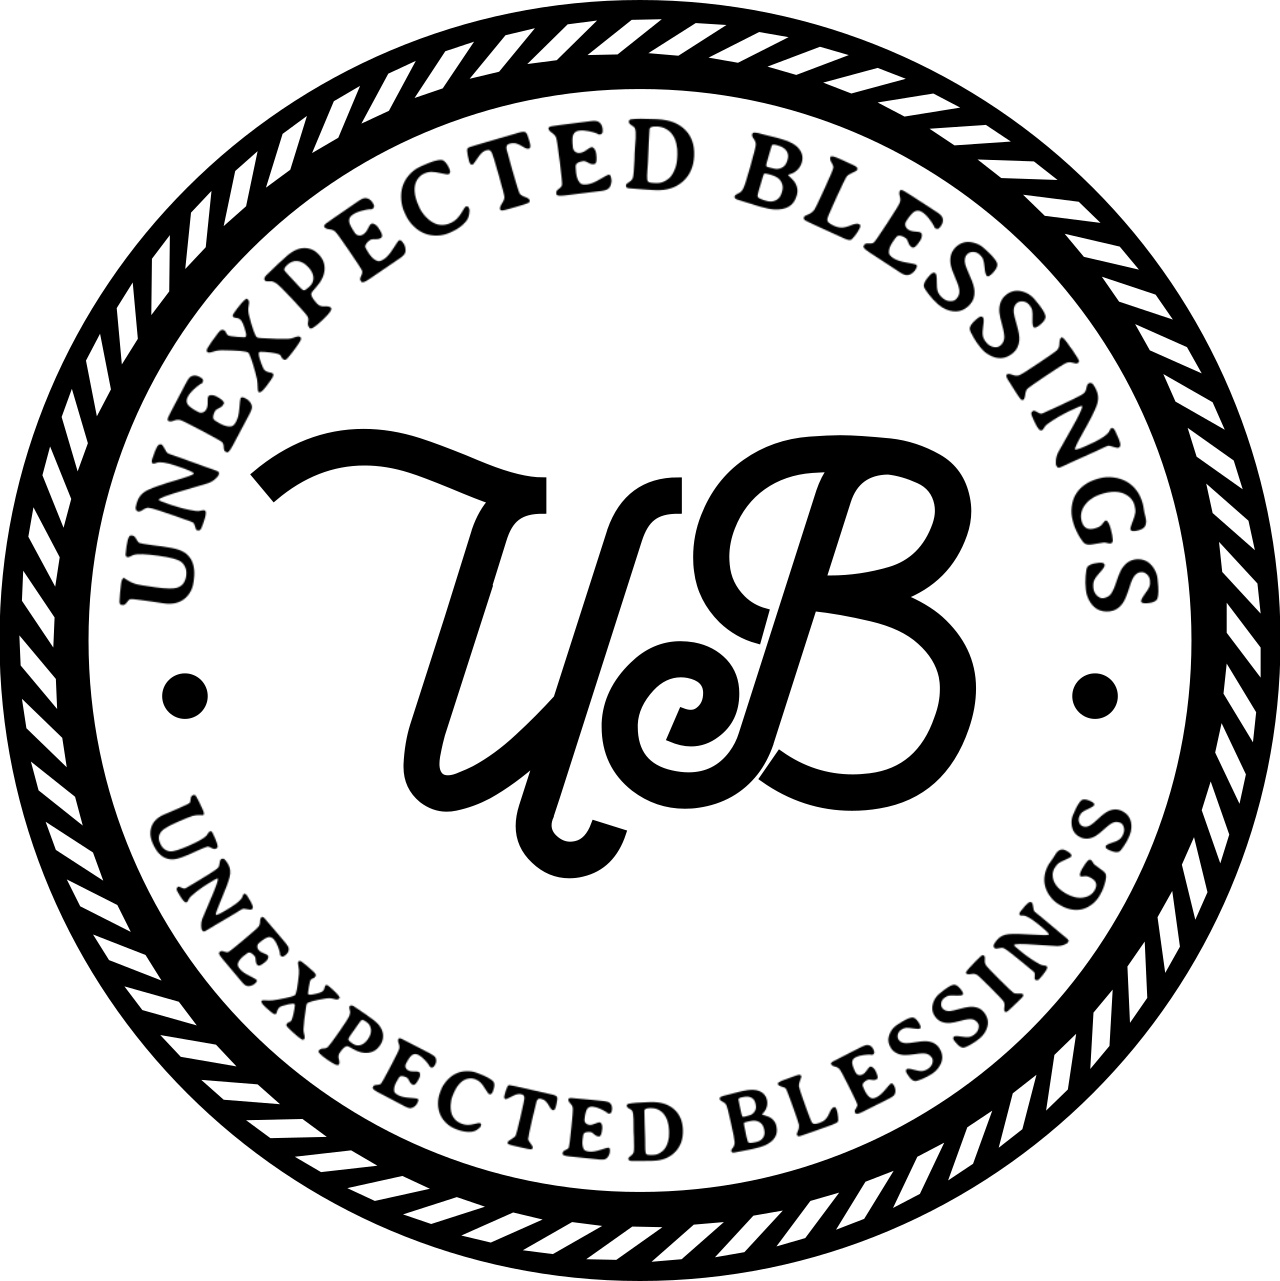 UNEXPECTED BLESSINGS's logo